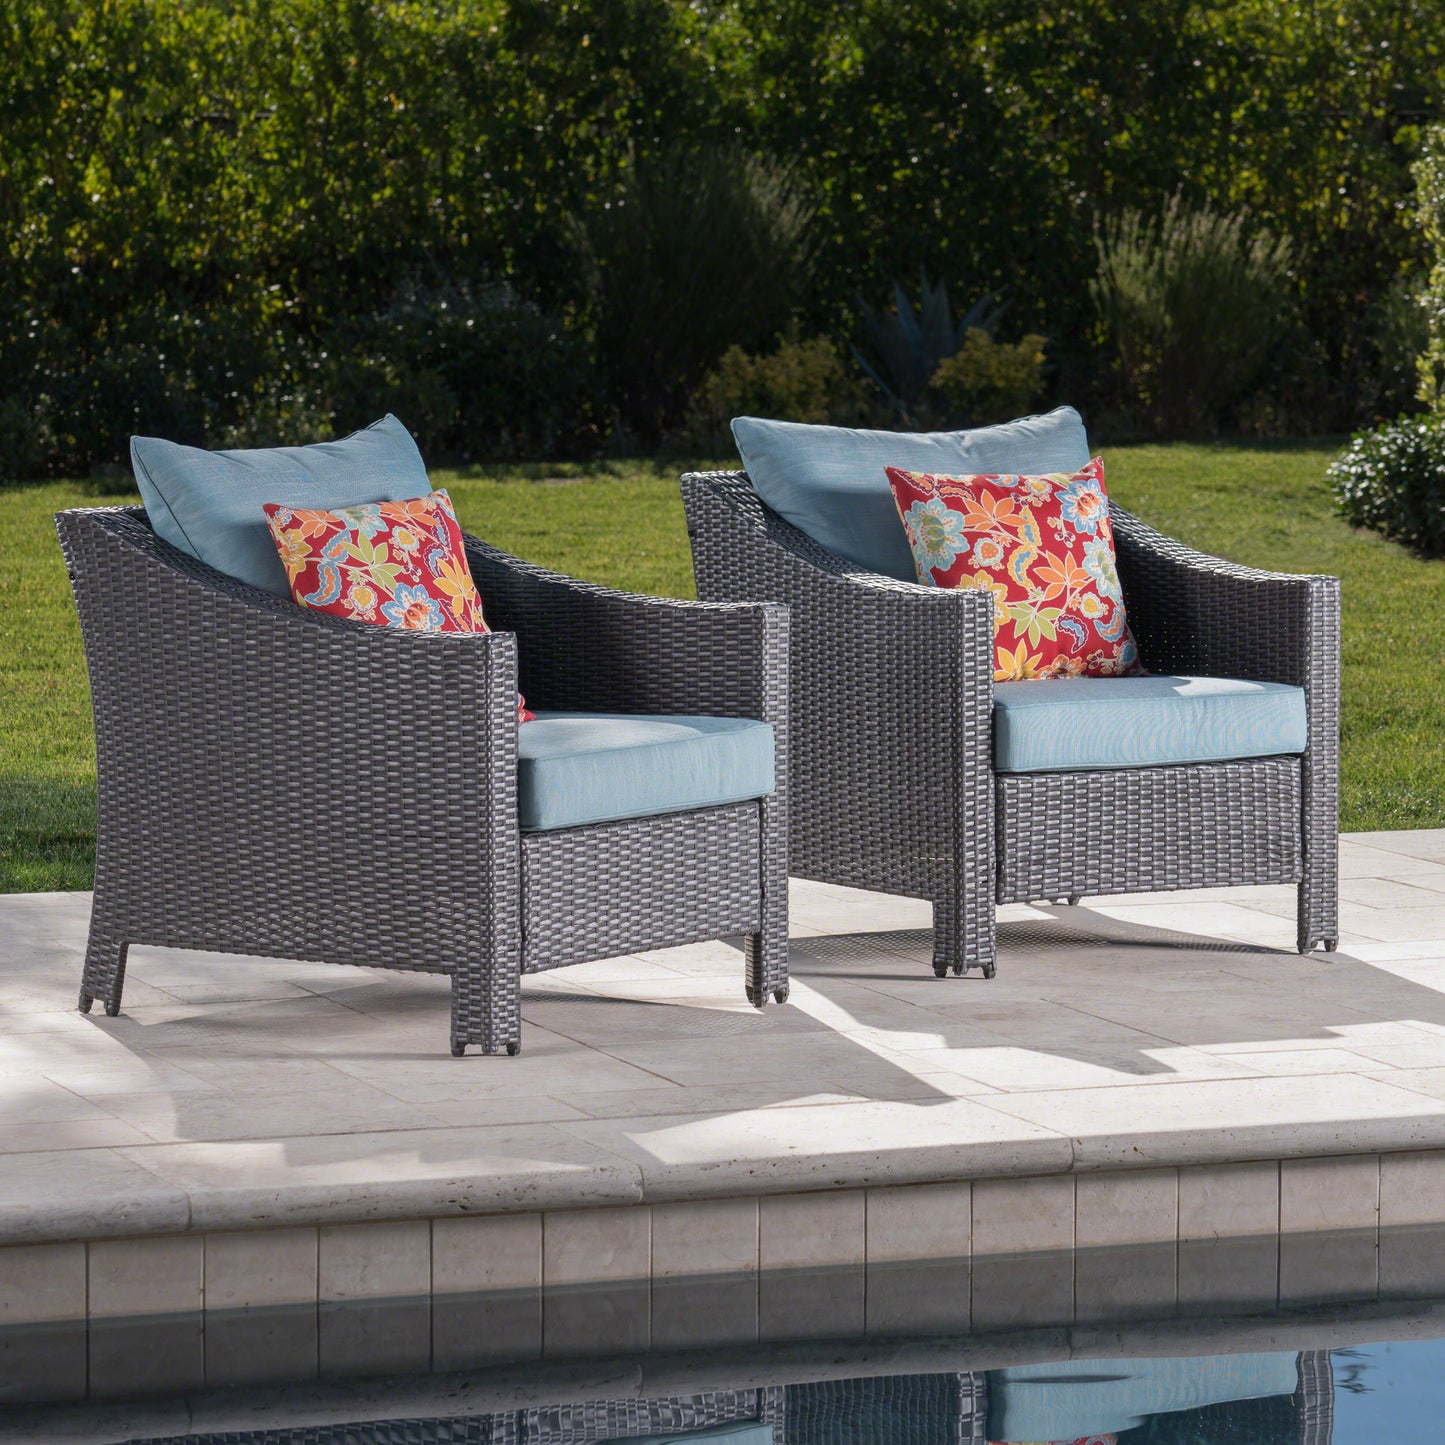 Caspian Outdoor Gray Wicker Club Chairs with Teal Water Resistant Cushions (Set of 2)